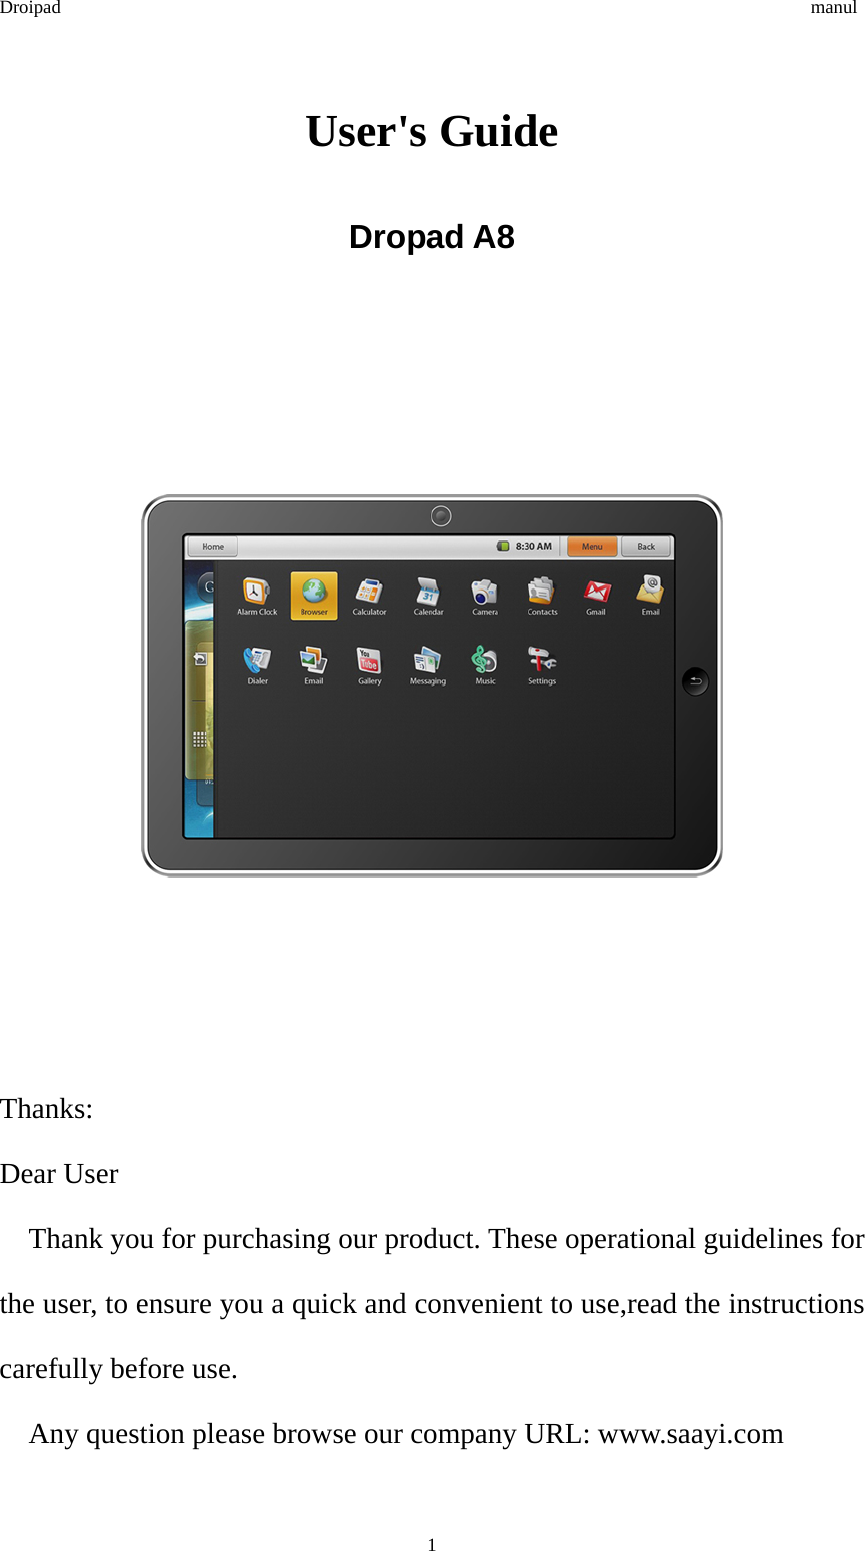 Droipad                                                                                manul User&apos;s Guide Dropad A8        Thanks: Dear User     Thank you for purchasing our product. These operational guidelines for the user, to ensure you a quick and convenient to use,read the instructions carefully before use.       Any question please browse our company URL: www.saayi.com  1